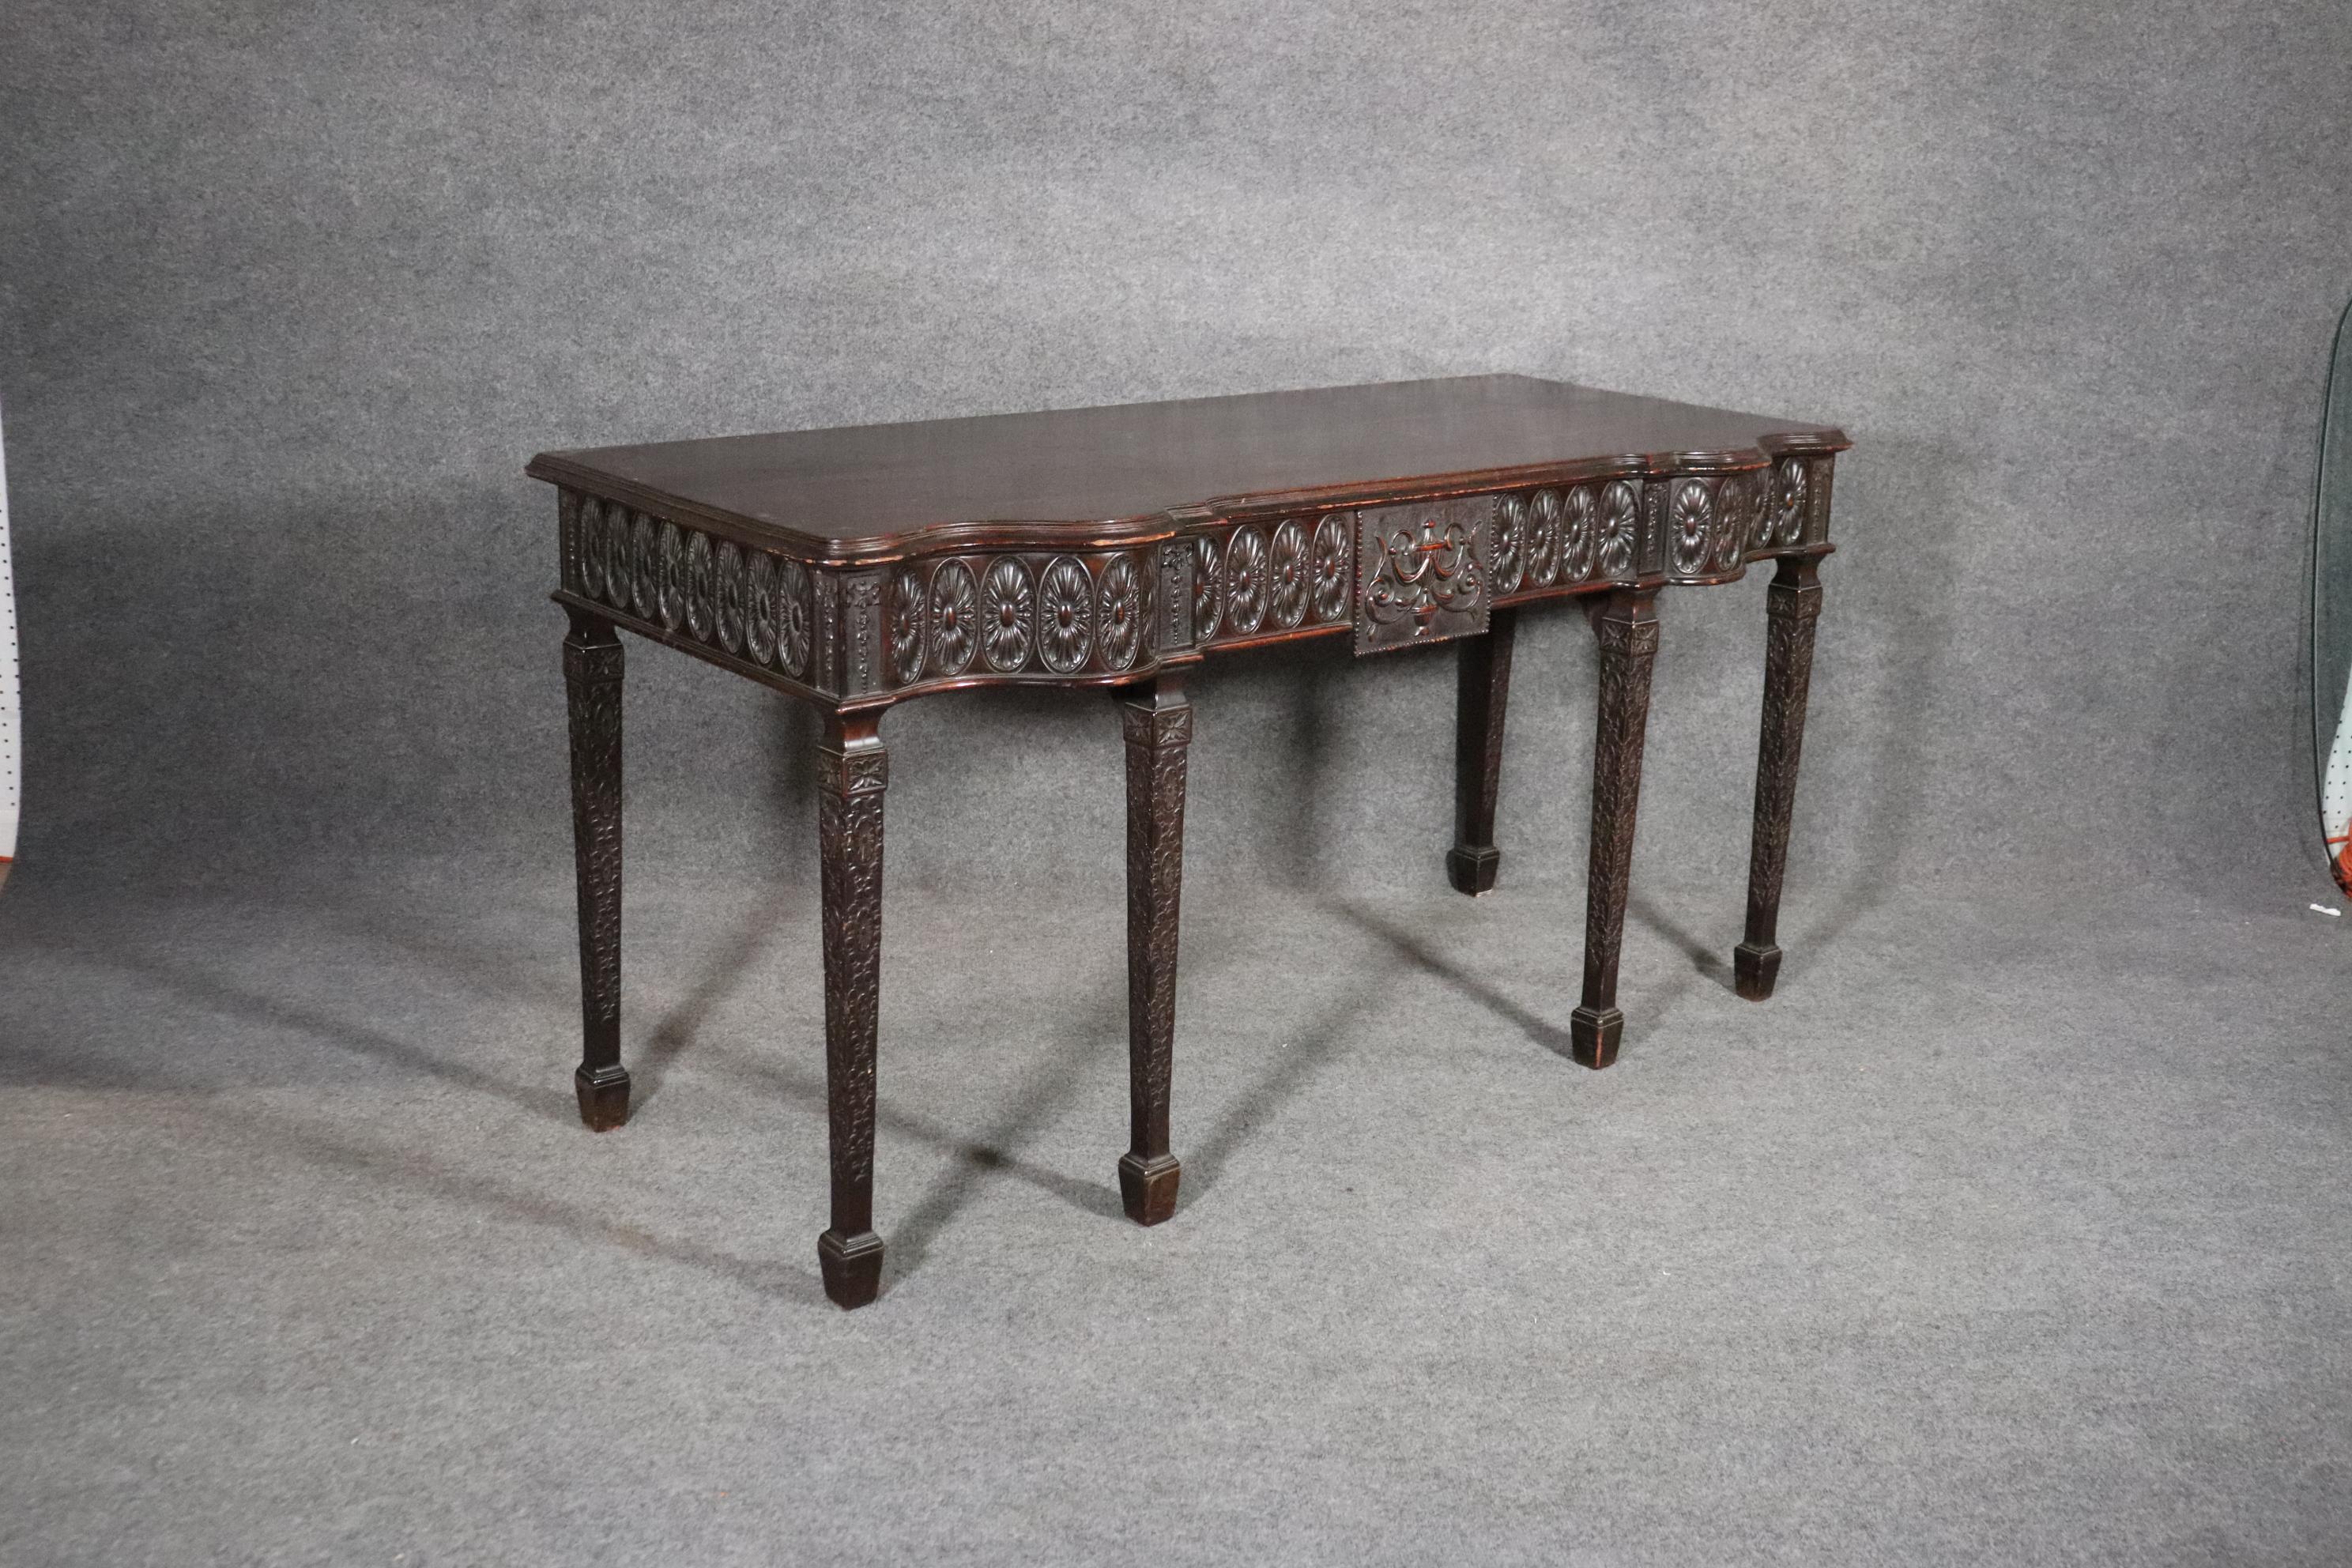 This is a superb quality English Buffet or Huntboard that can also be used as a console table. The table features that beautifully balanced design that Adams is known for and the carving is spectacular. The foreground carving is crisp and bold and